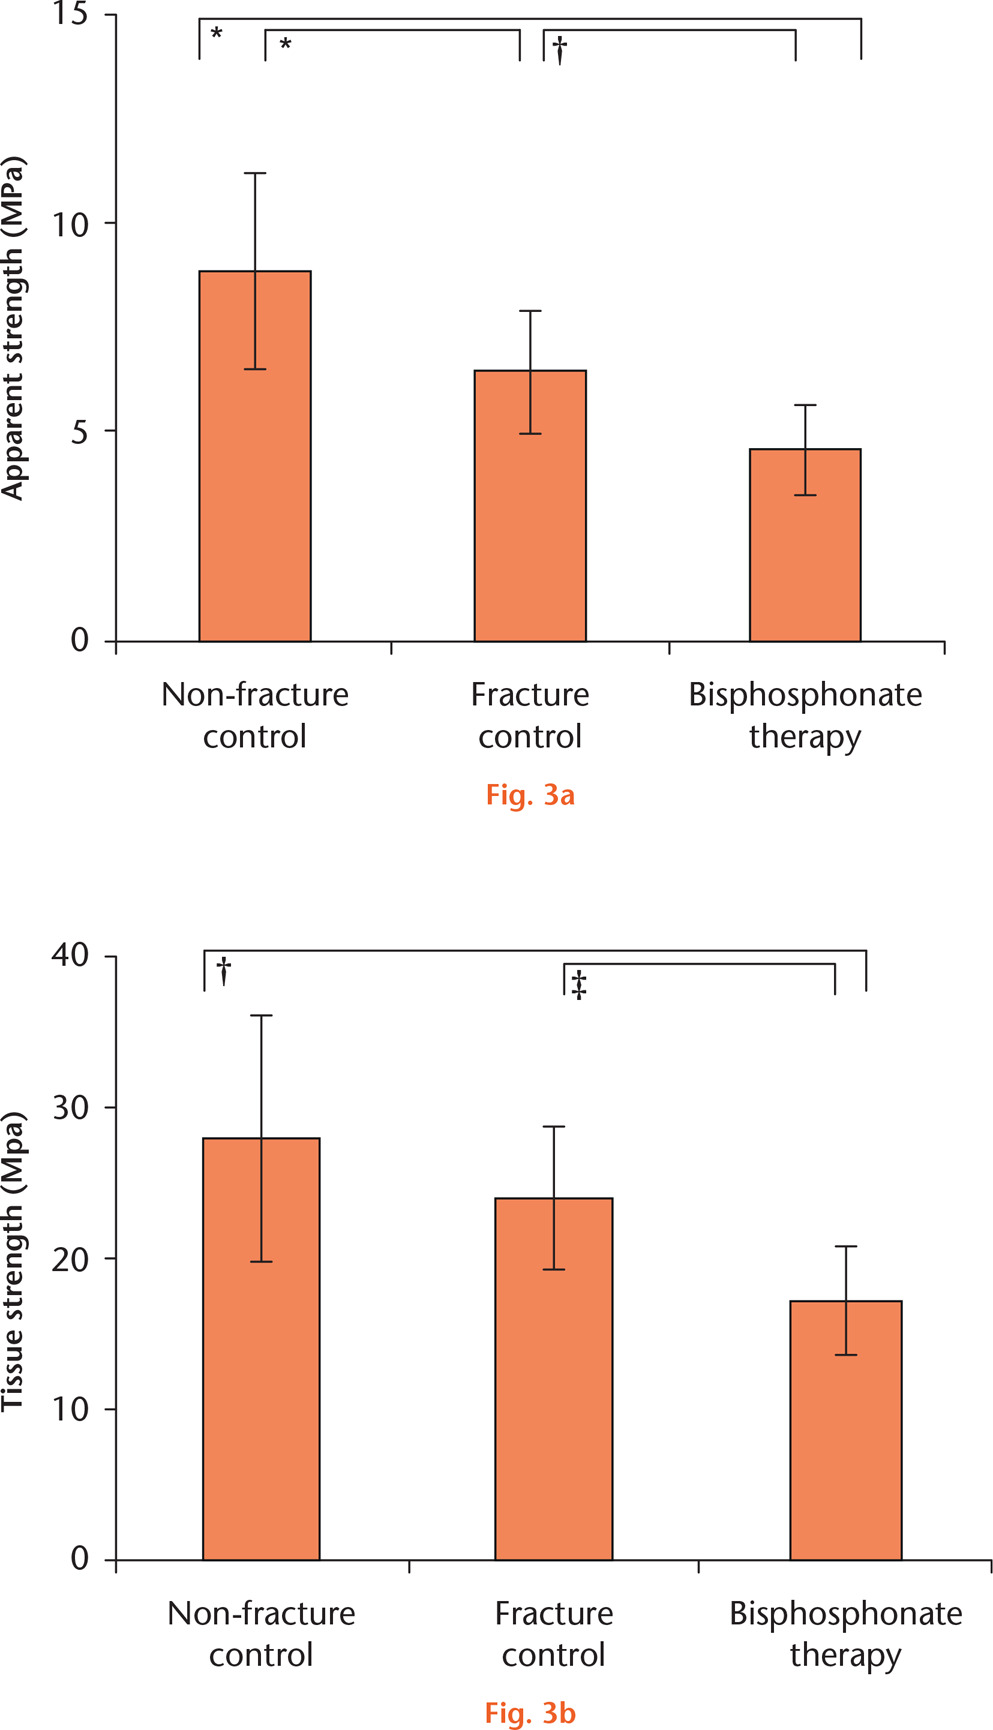  
          Compressive strength of BP-treated bone cores in comparison with controls. Trabecular cores were compared using one-way ANOVA with Tukey’s post hoc test. a) F = 27.3, p < 0.001; b) F = 6.59, p = 0.003. Symbols denote significant pairwise difference at *p < 0.001, †p < 0.01, and ‡p < 0.05.
        